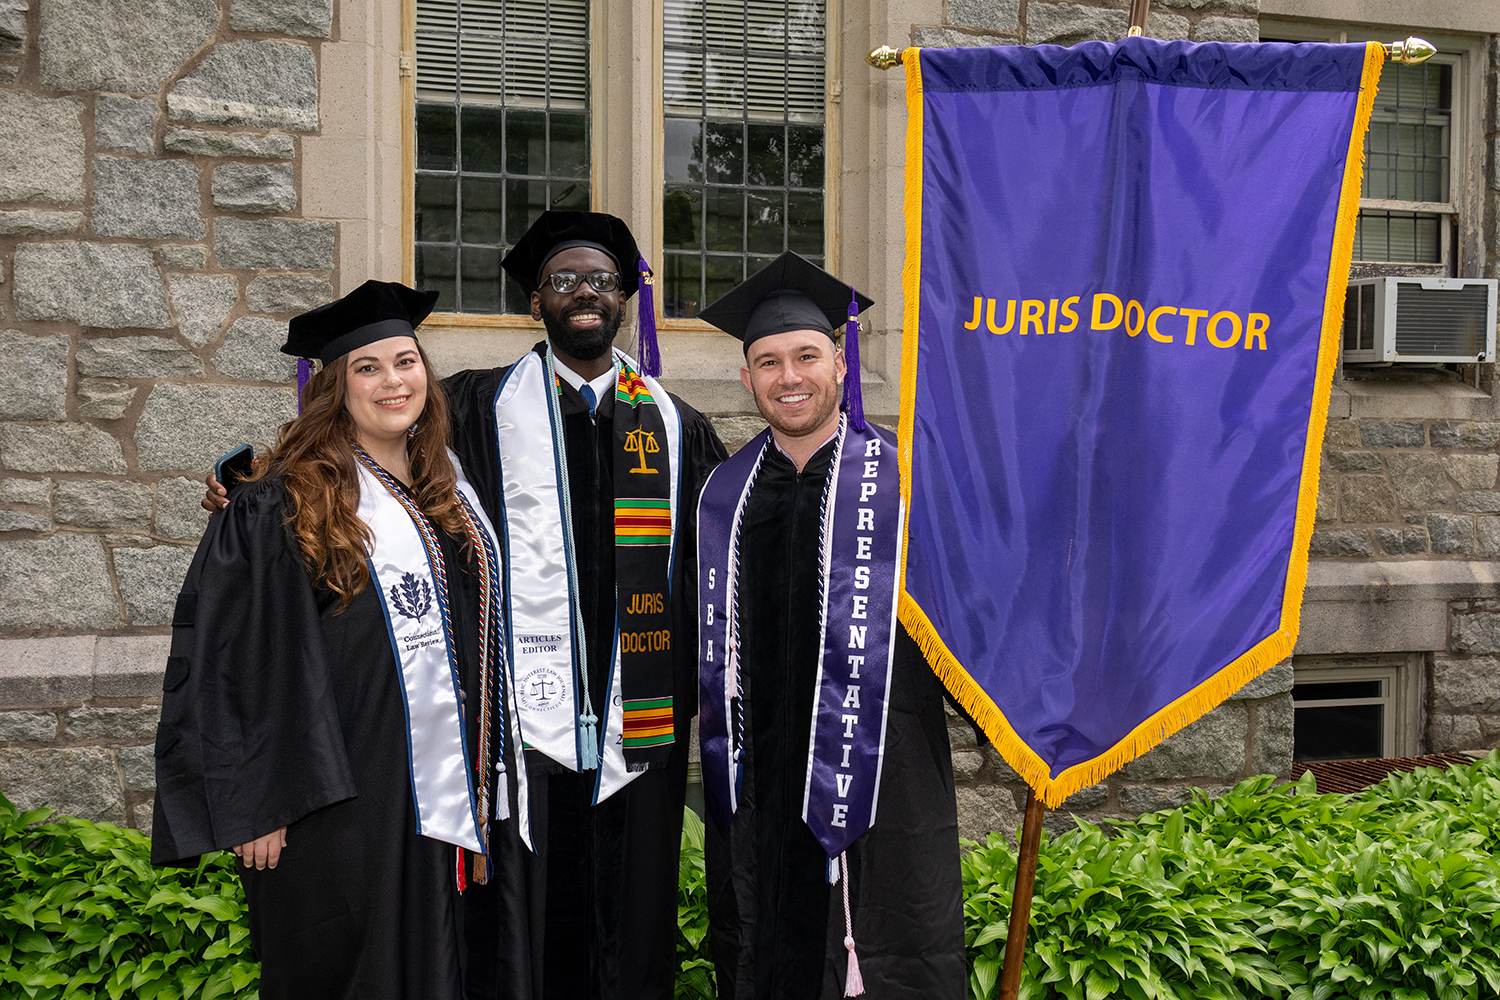 Three UConn law graduates in robes and caps with Juris Doctor flag